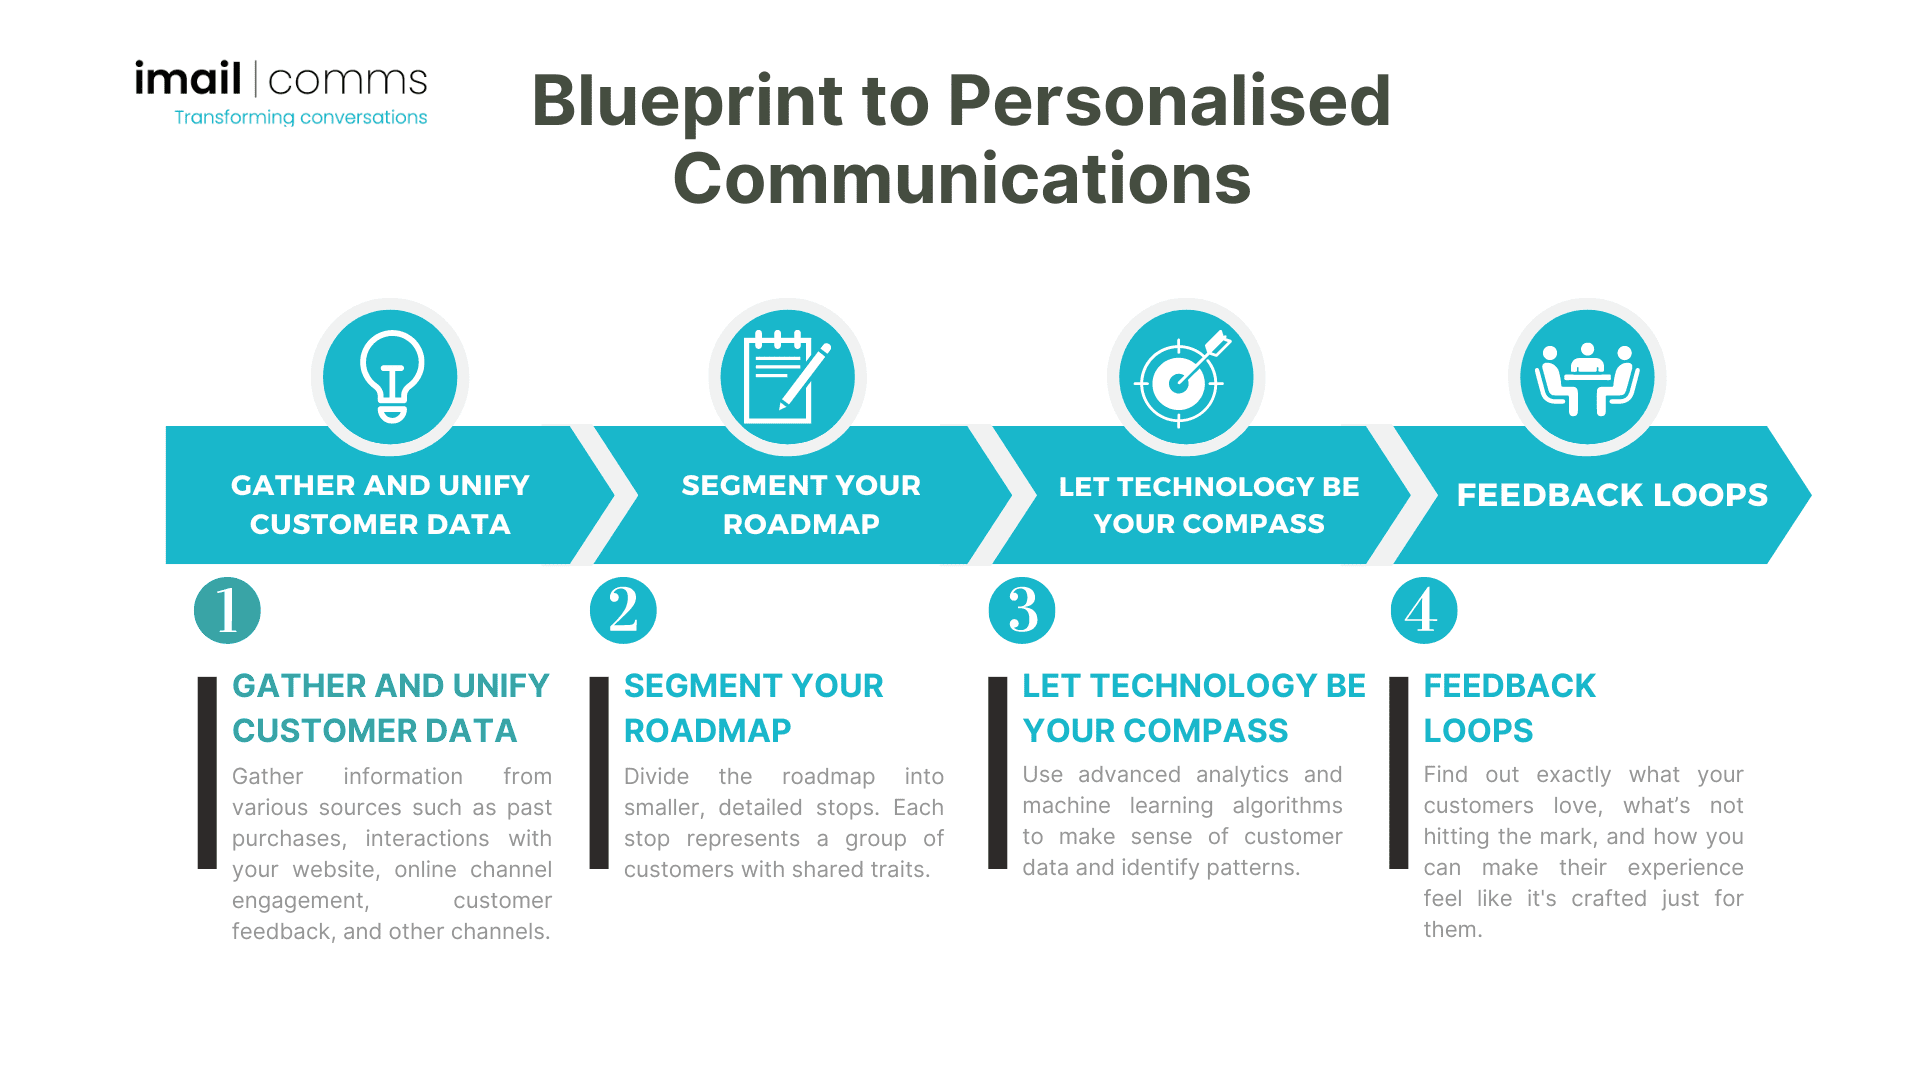 A step-by-step blueprint on how to personalise communication.